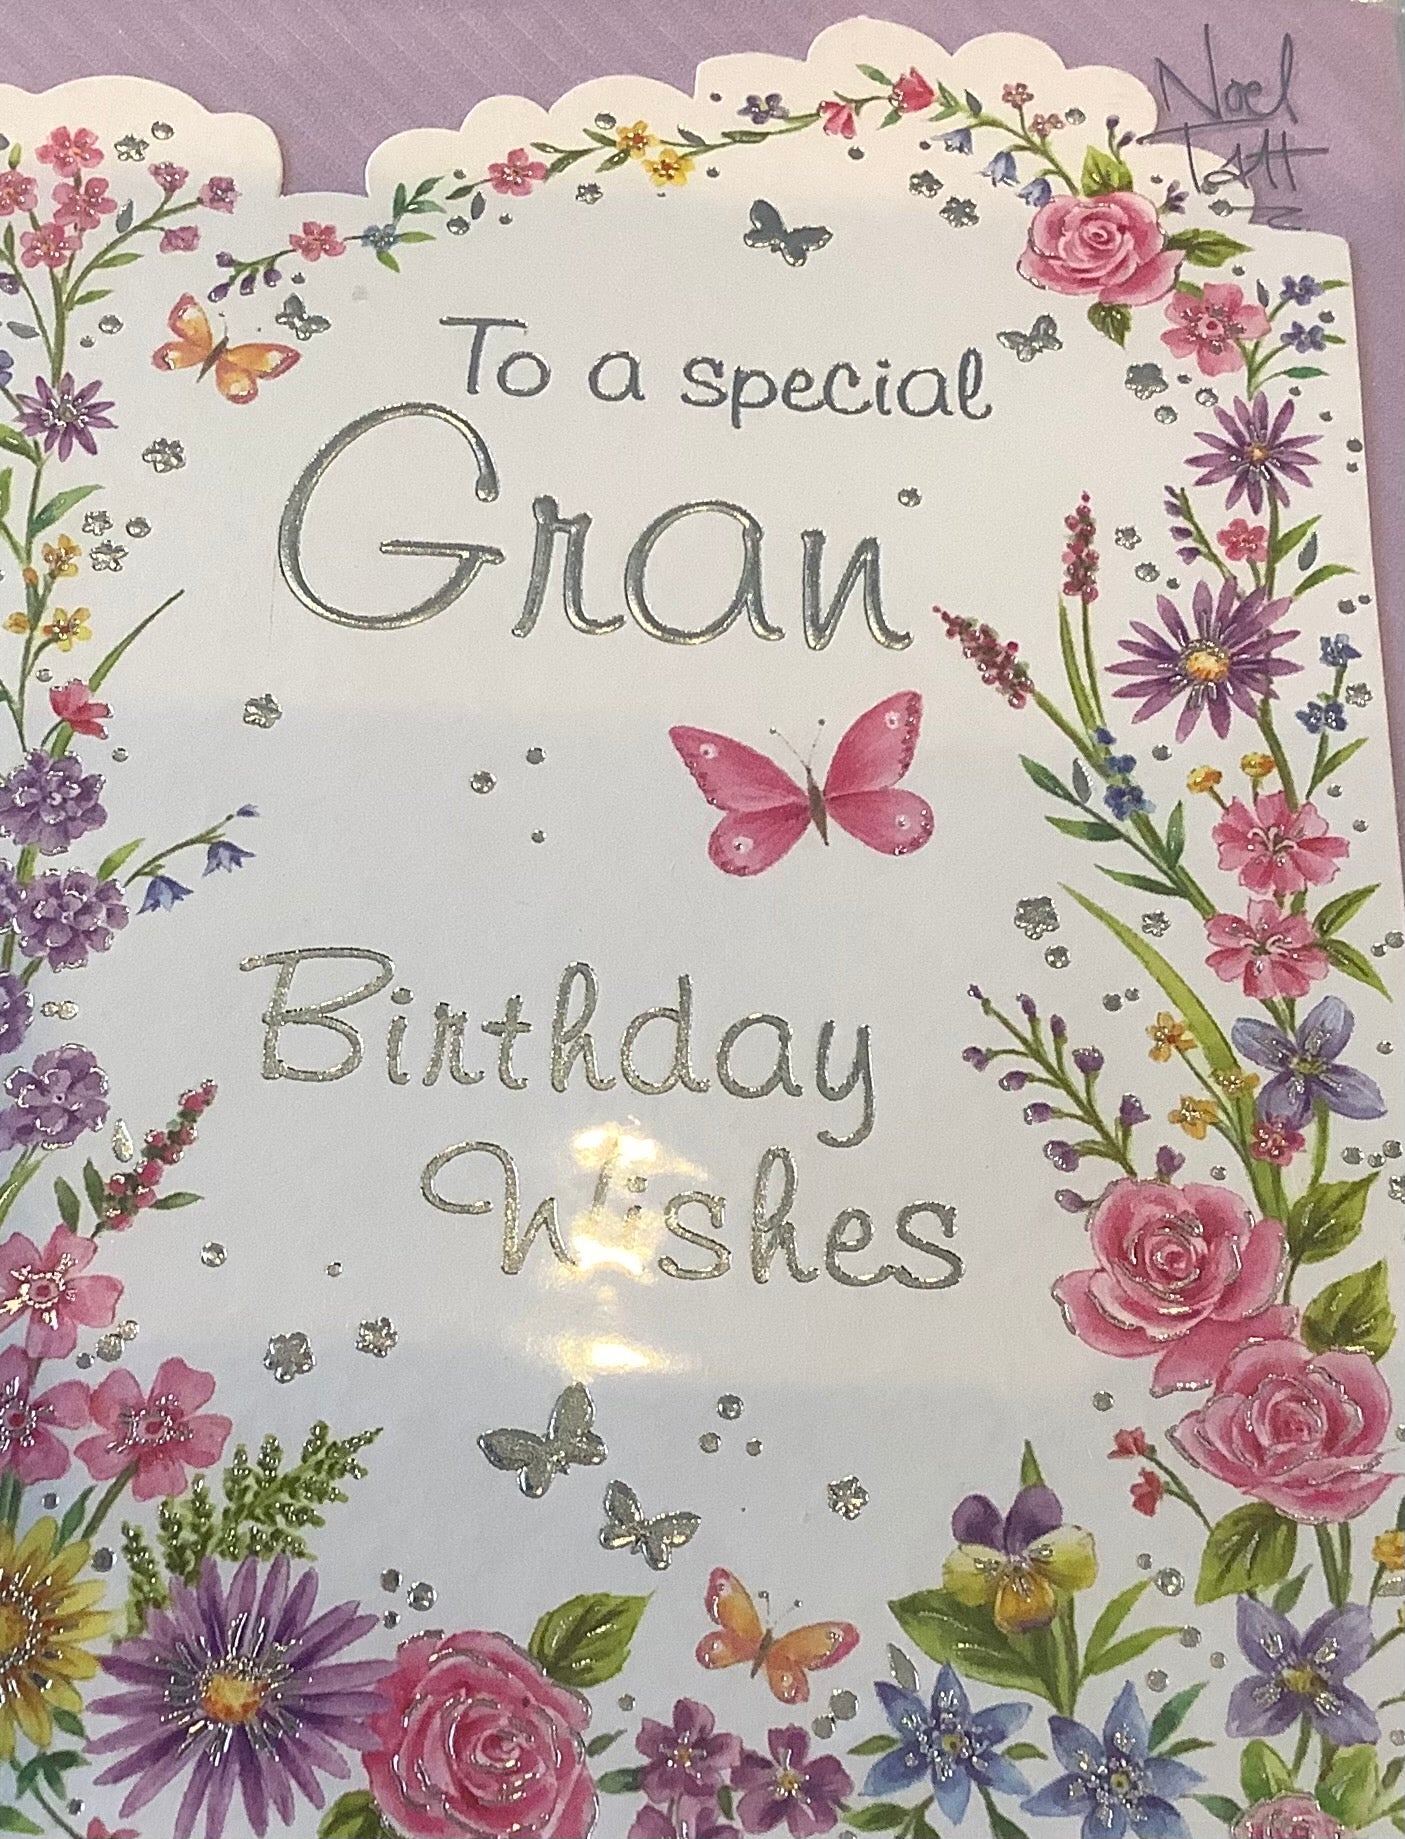 To a special gran Birthday Wishes